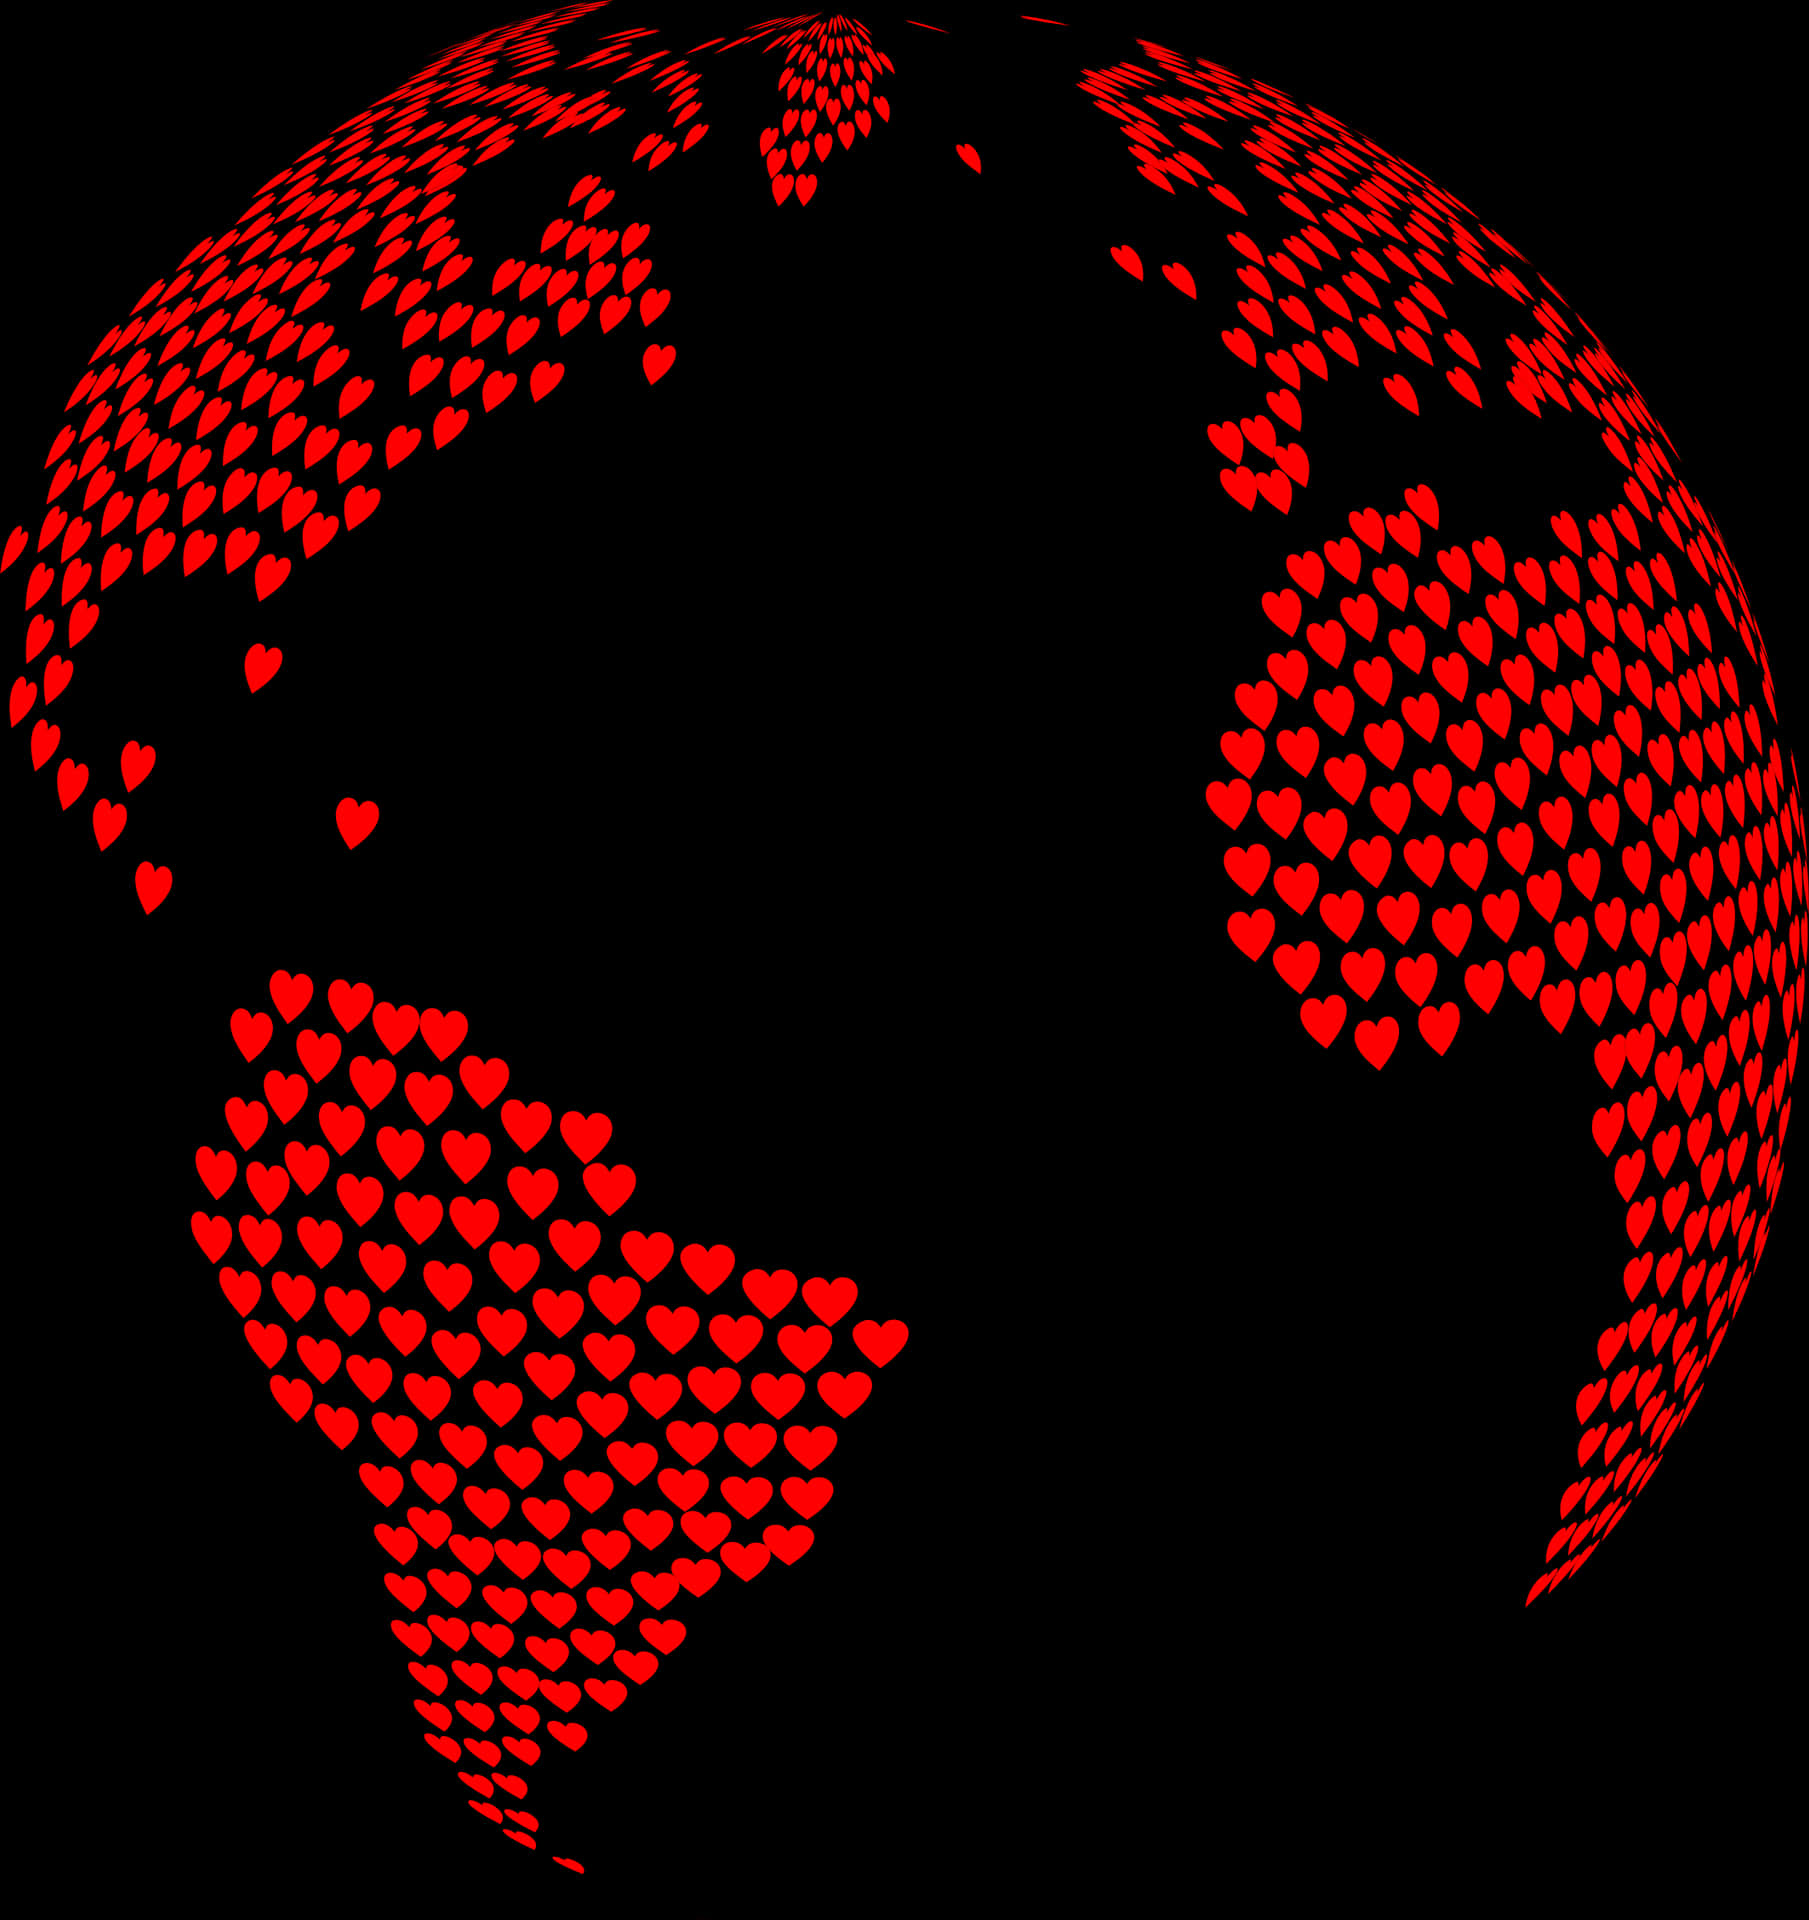 Heart Patterned World Map PNG image